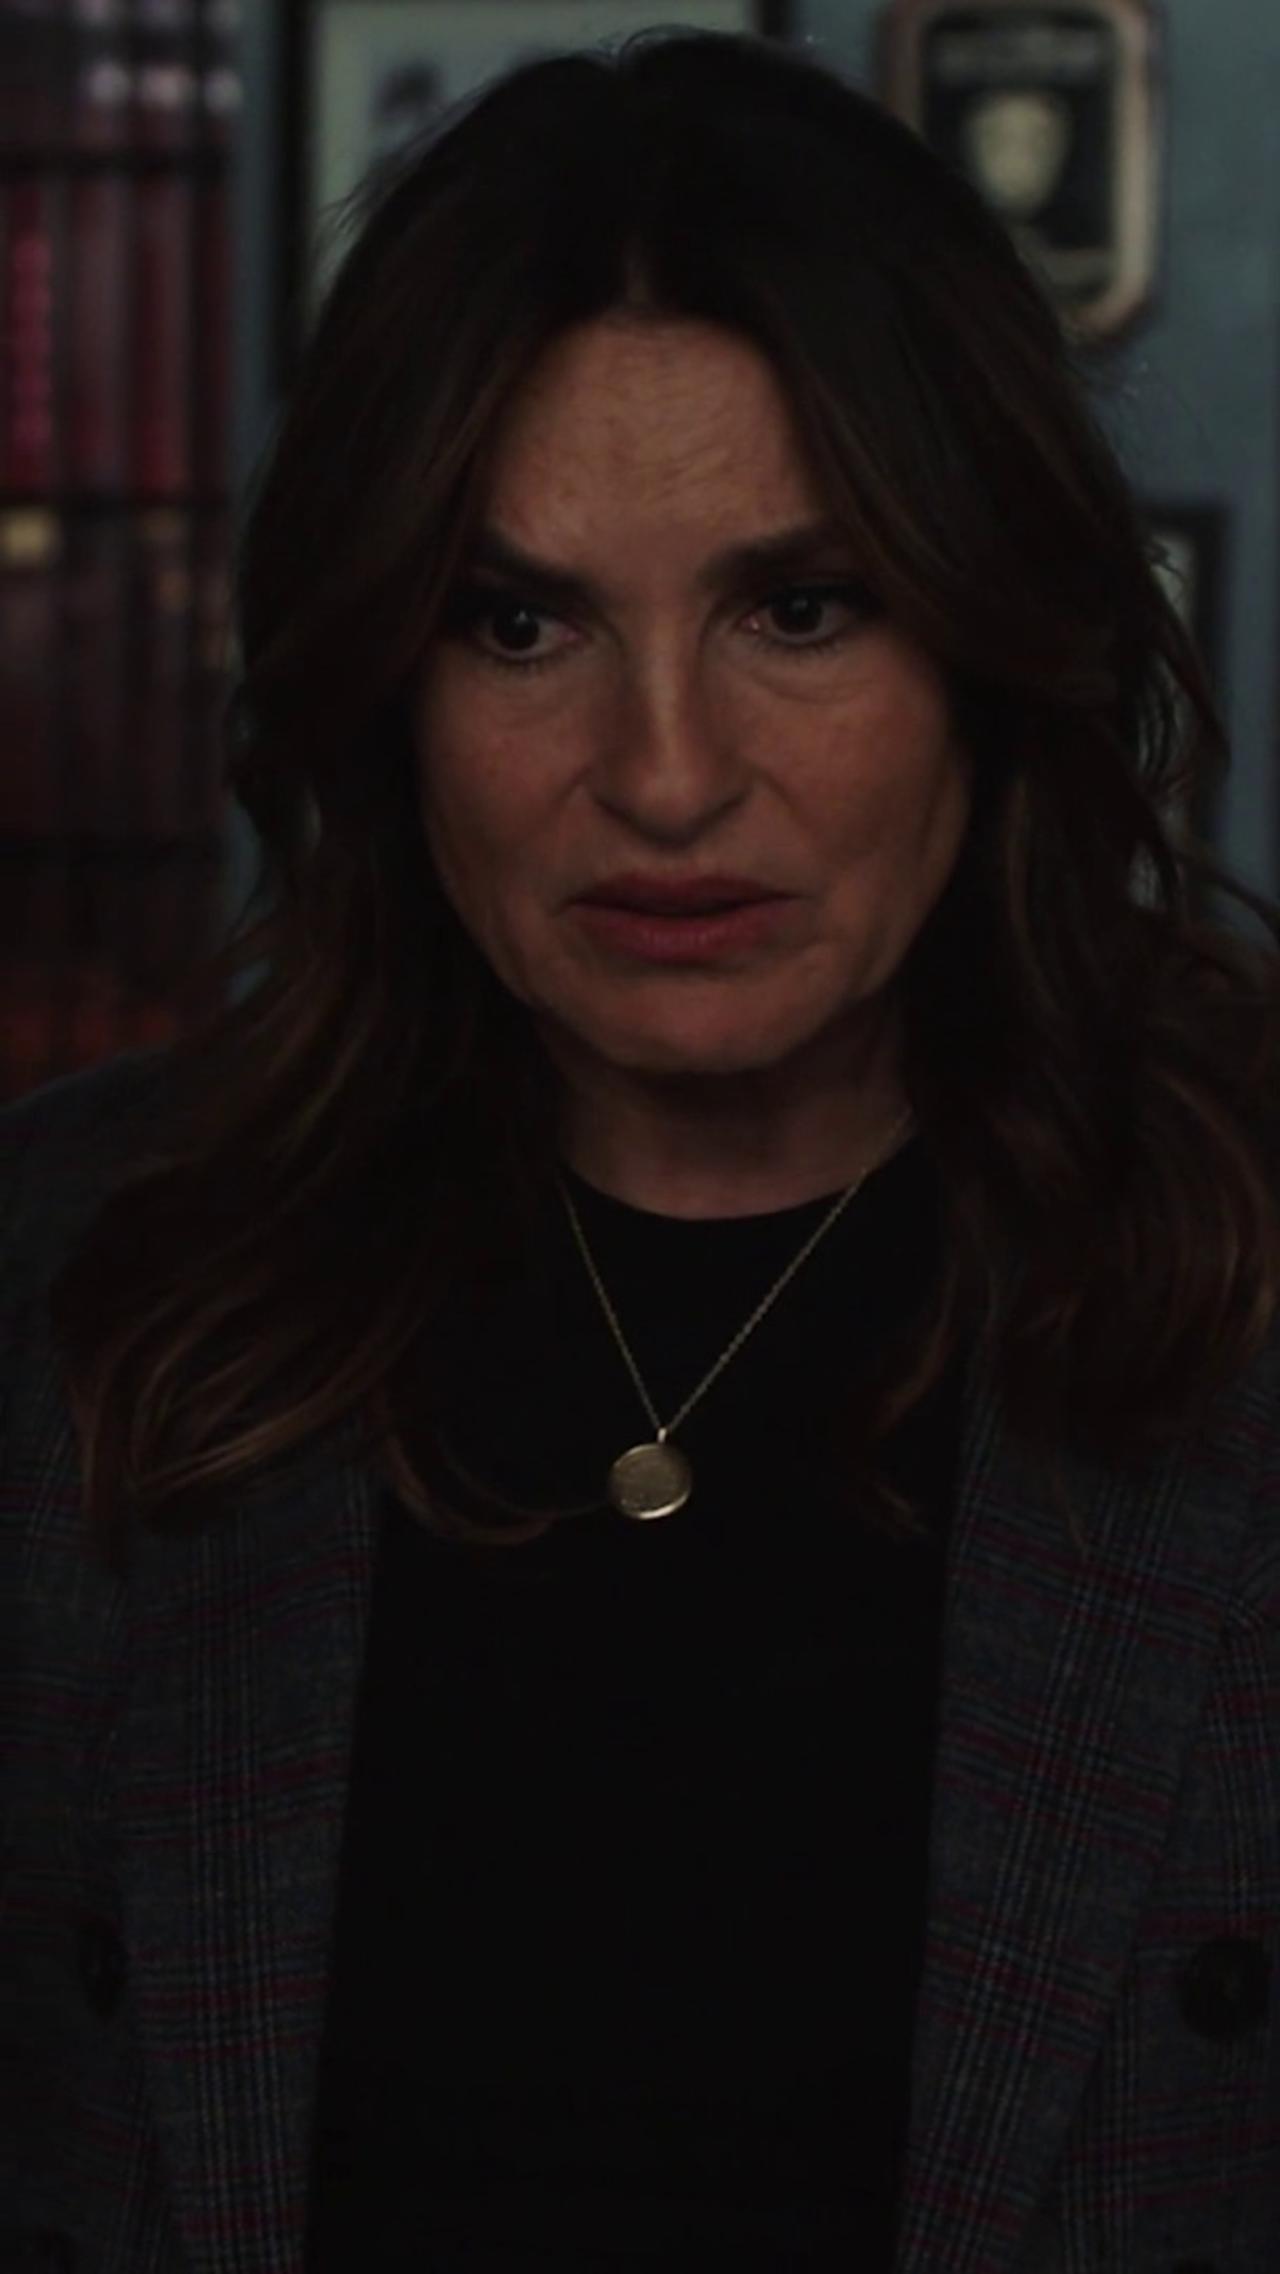 Olivia Benson Never Gives Up on NBC's Law & Order: SVU